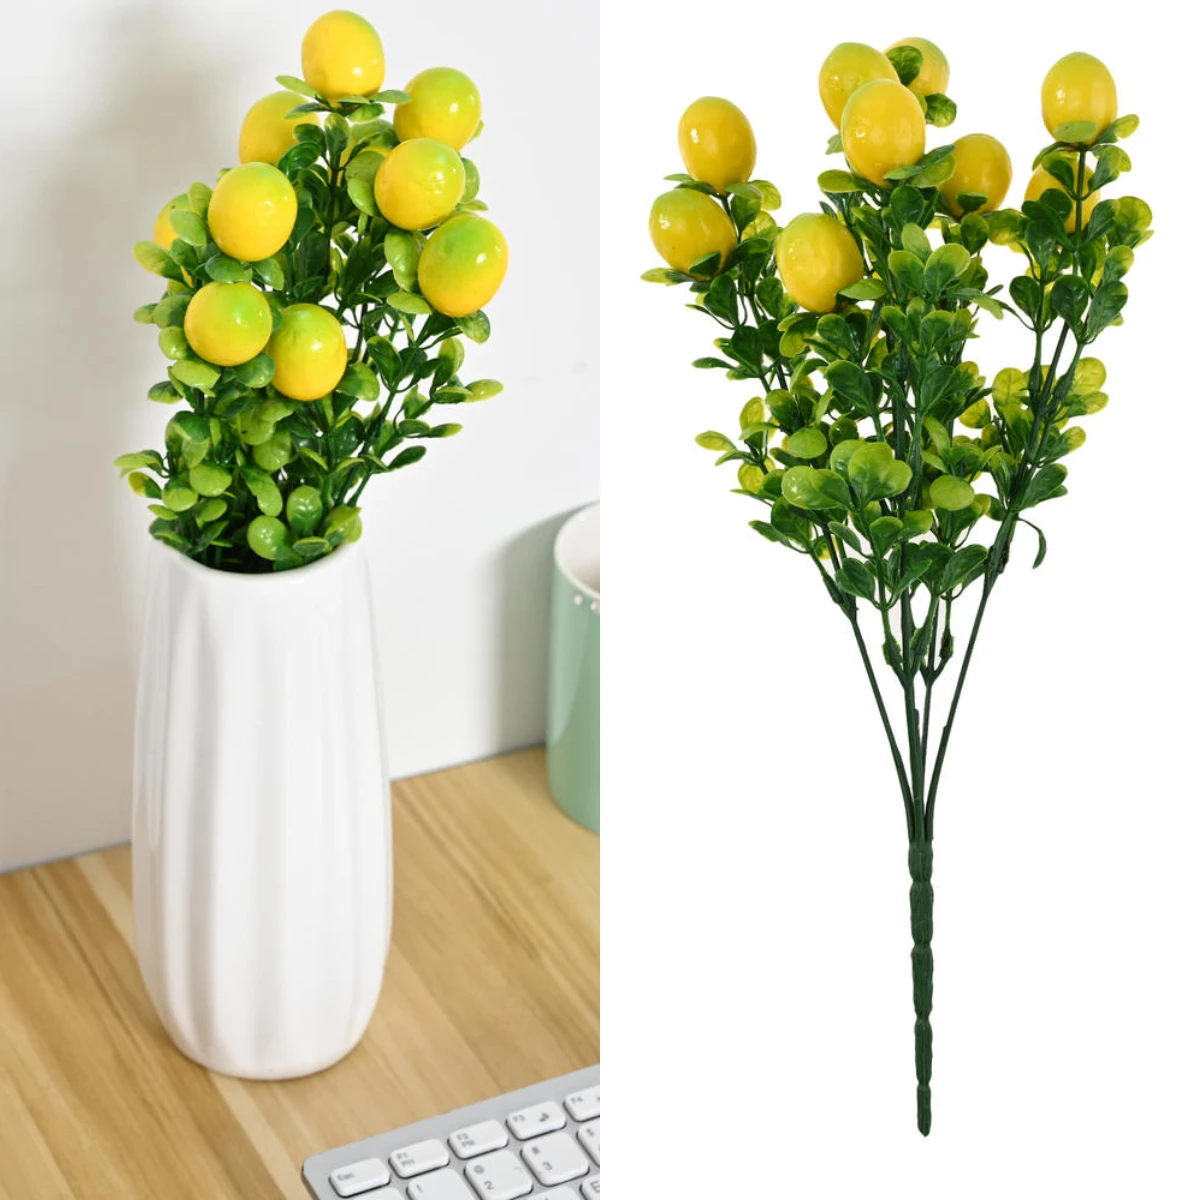 14 Inch Artificial Lemon Home Garden Fake Fruits Decoration Lifelike Plant Fake Tree Branches Table Ornament Photography Props